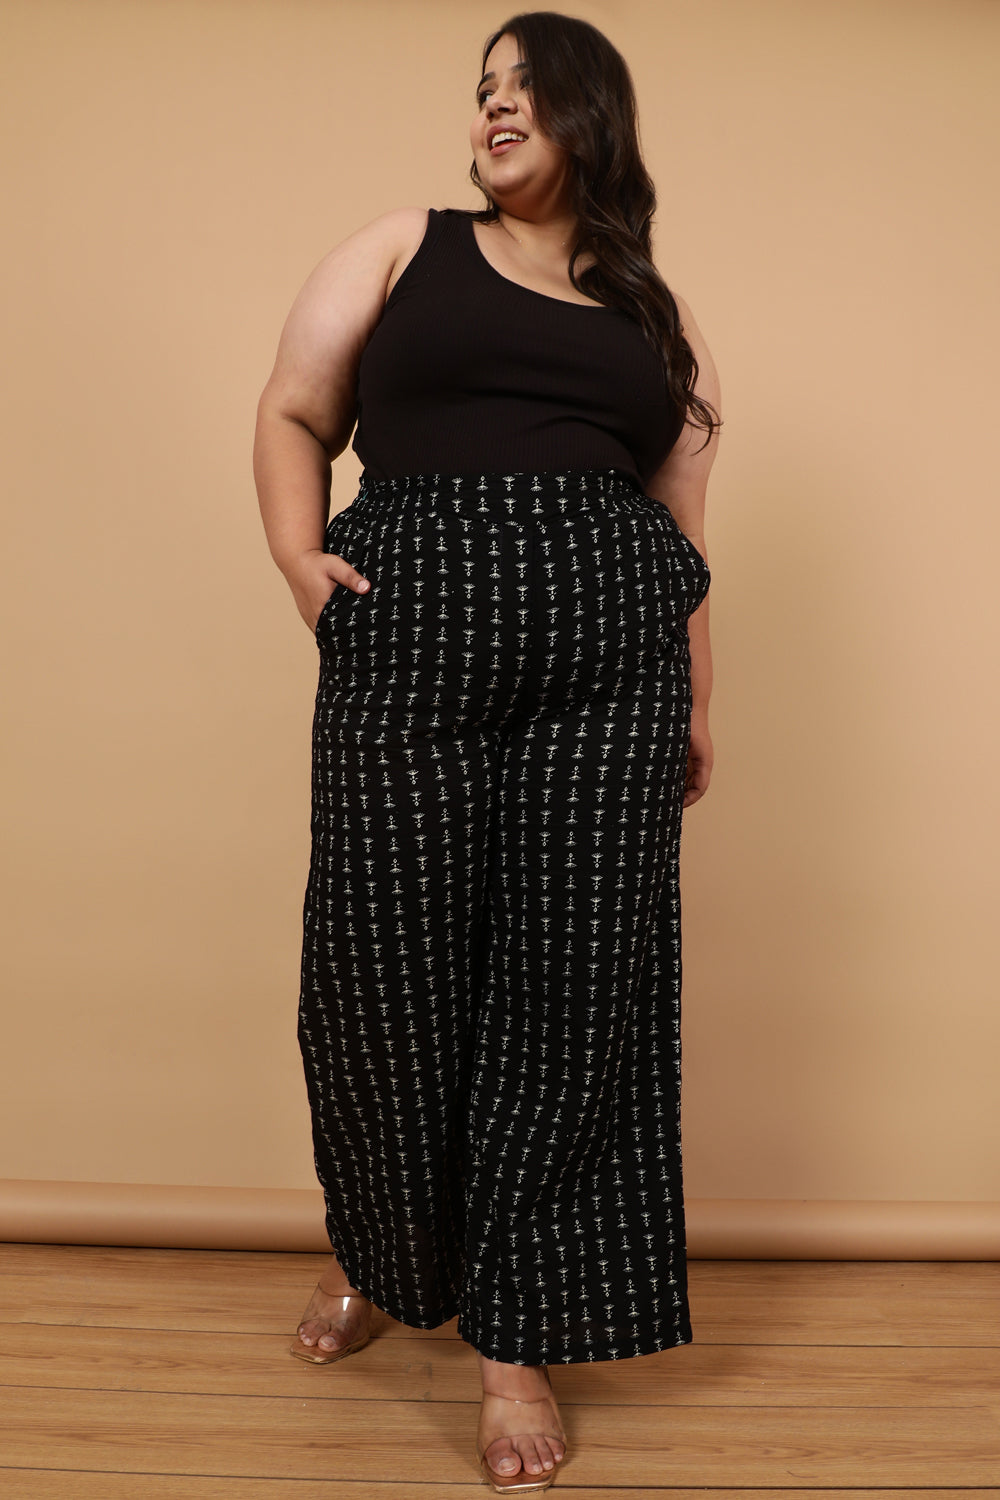 Plus Size Black High Waist Pants Online in India